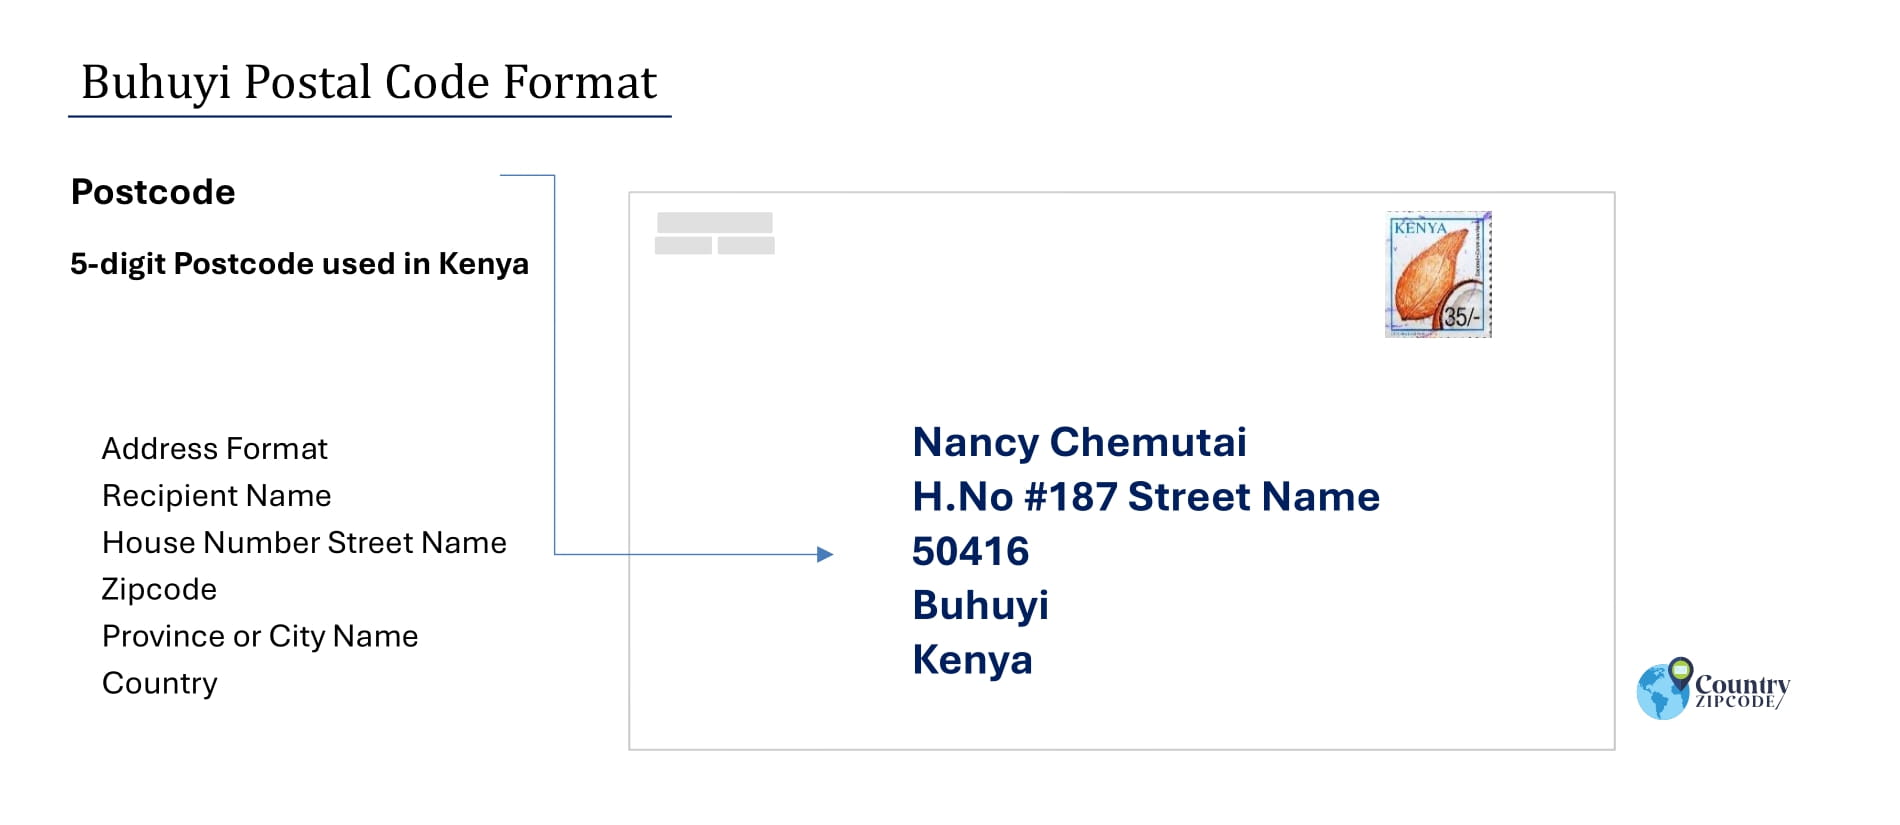 Example of Buhuyi Address and postal code format